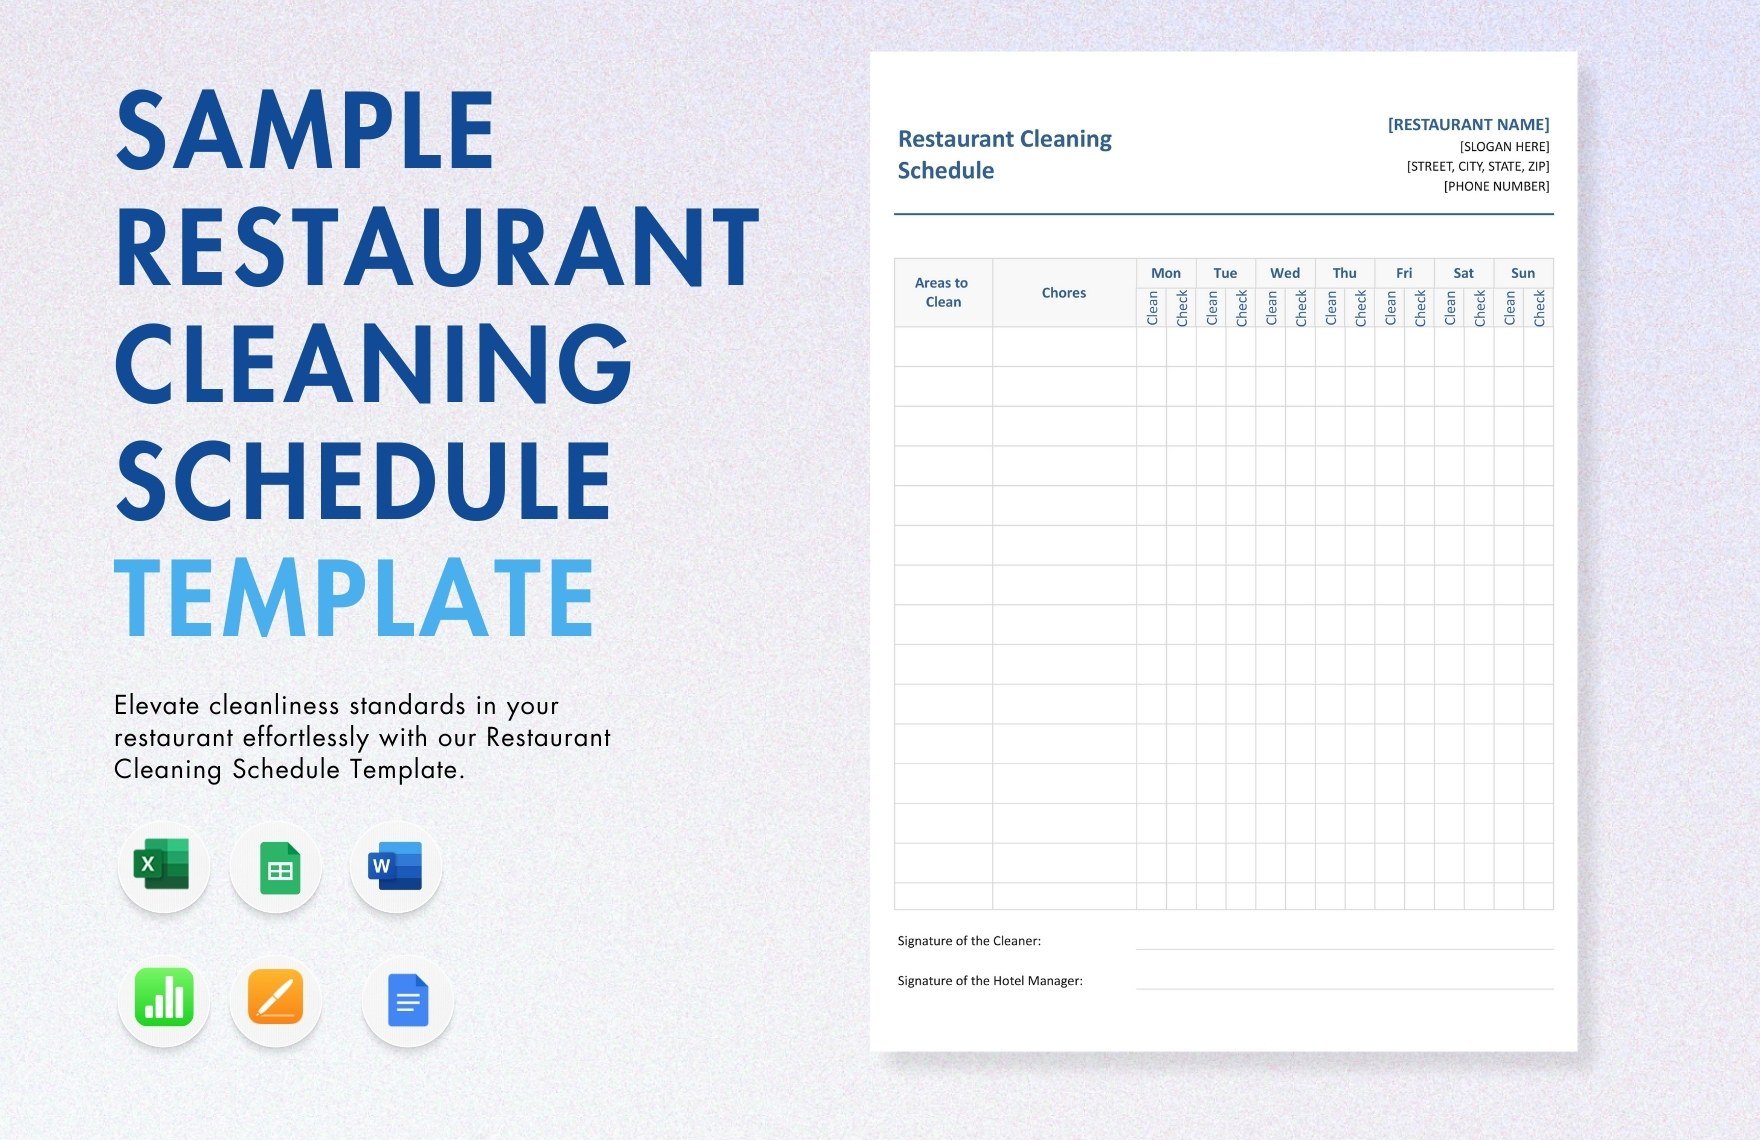 Sample Restaurant Cleaning Schedule Template